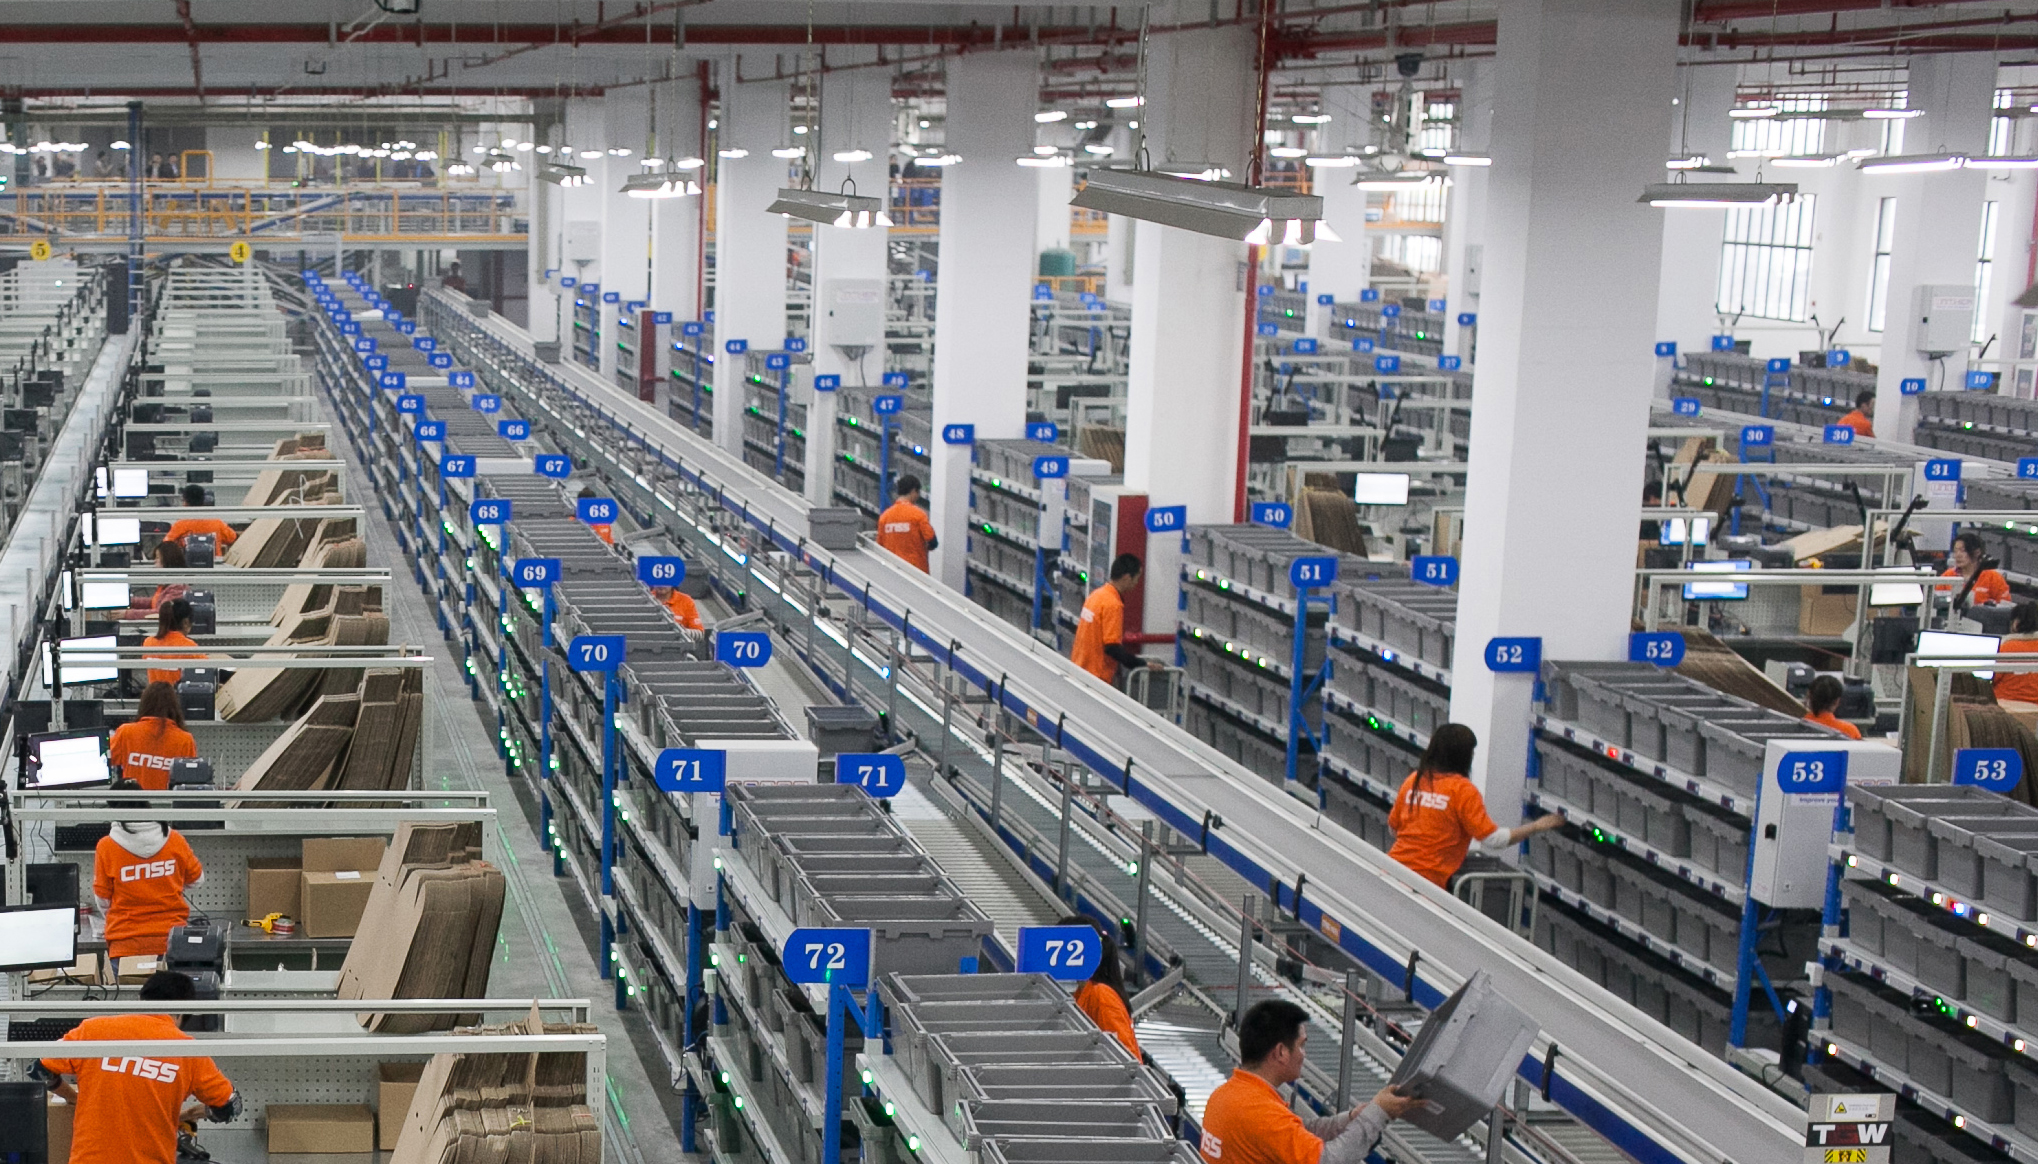 Shown here is 7.5 kilometers of conveyors at a distribution-center-for-hire in Danyang, China. Owned by e-commerce company CNSS, the automated center sorts and ships up to 7,500 packages per hour. Designed by TGW Logistics Group, it includes TGW conveyors that automatically feed shelves, channelizers and sorters. Online orders trigger commands to tell workers to put goods in totes on the conveyors. Scanners automatically confirm tote contents. Then the totes ride down to a picker for boxing and shipment. The biggest sorter is 100 meters long with 30 chutes.